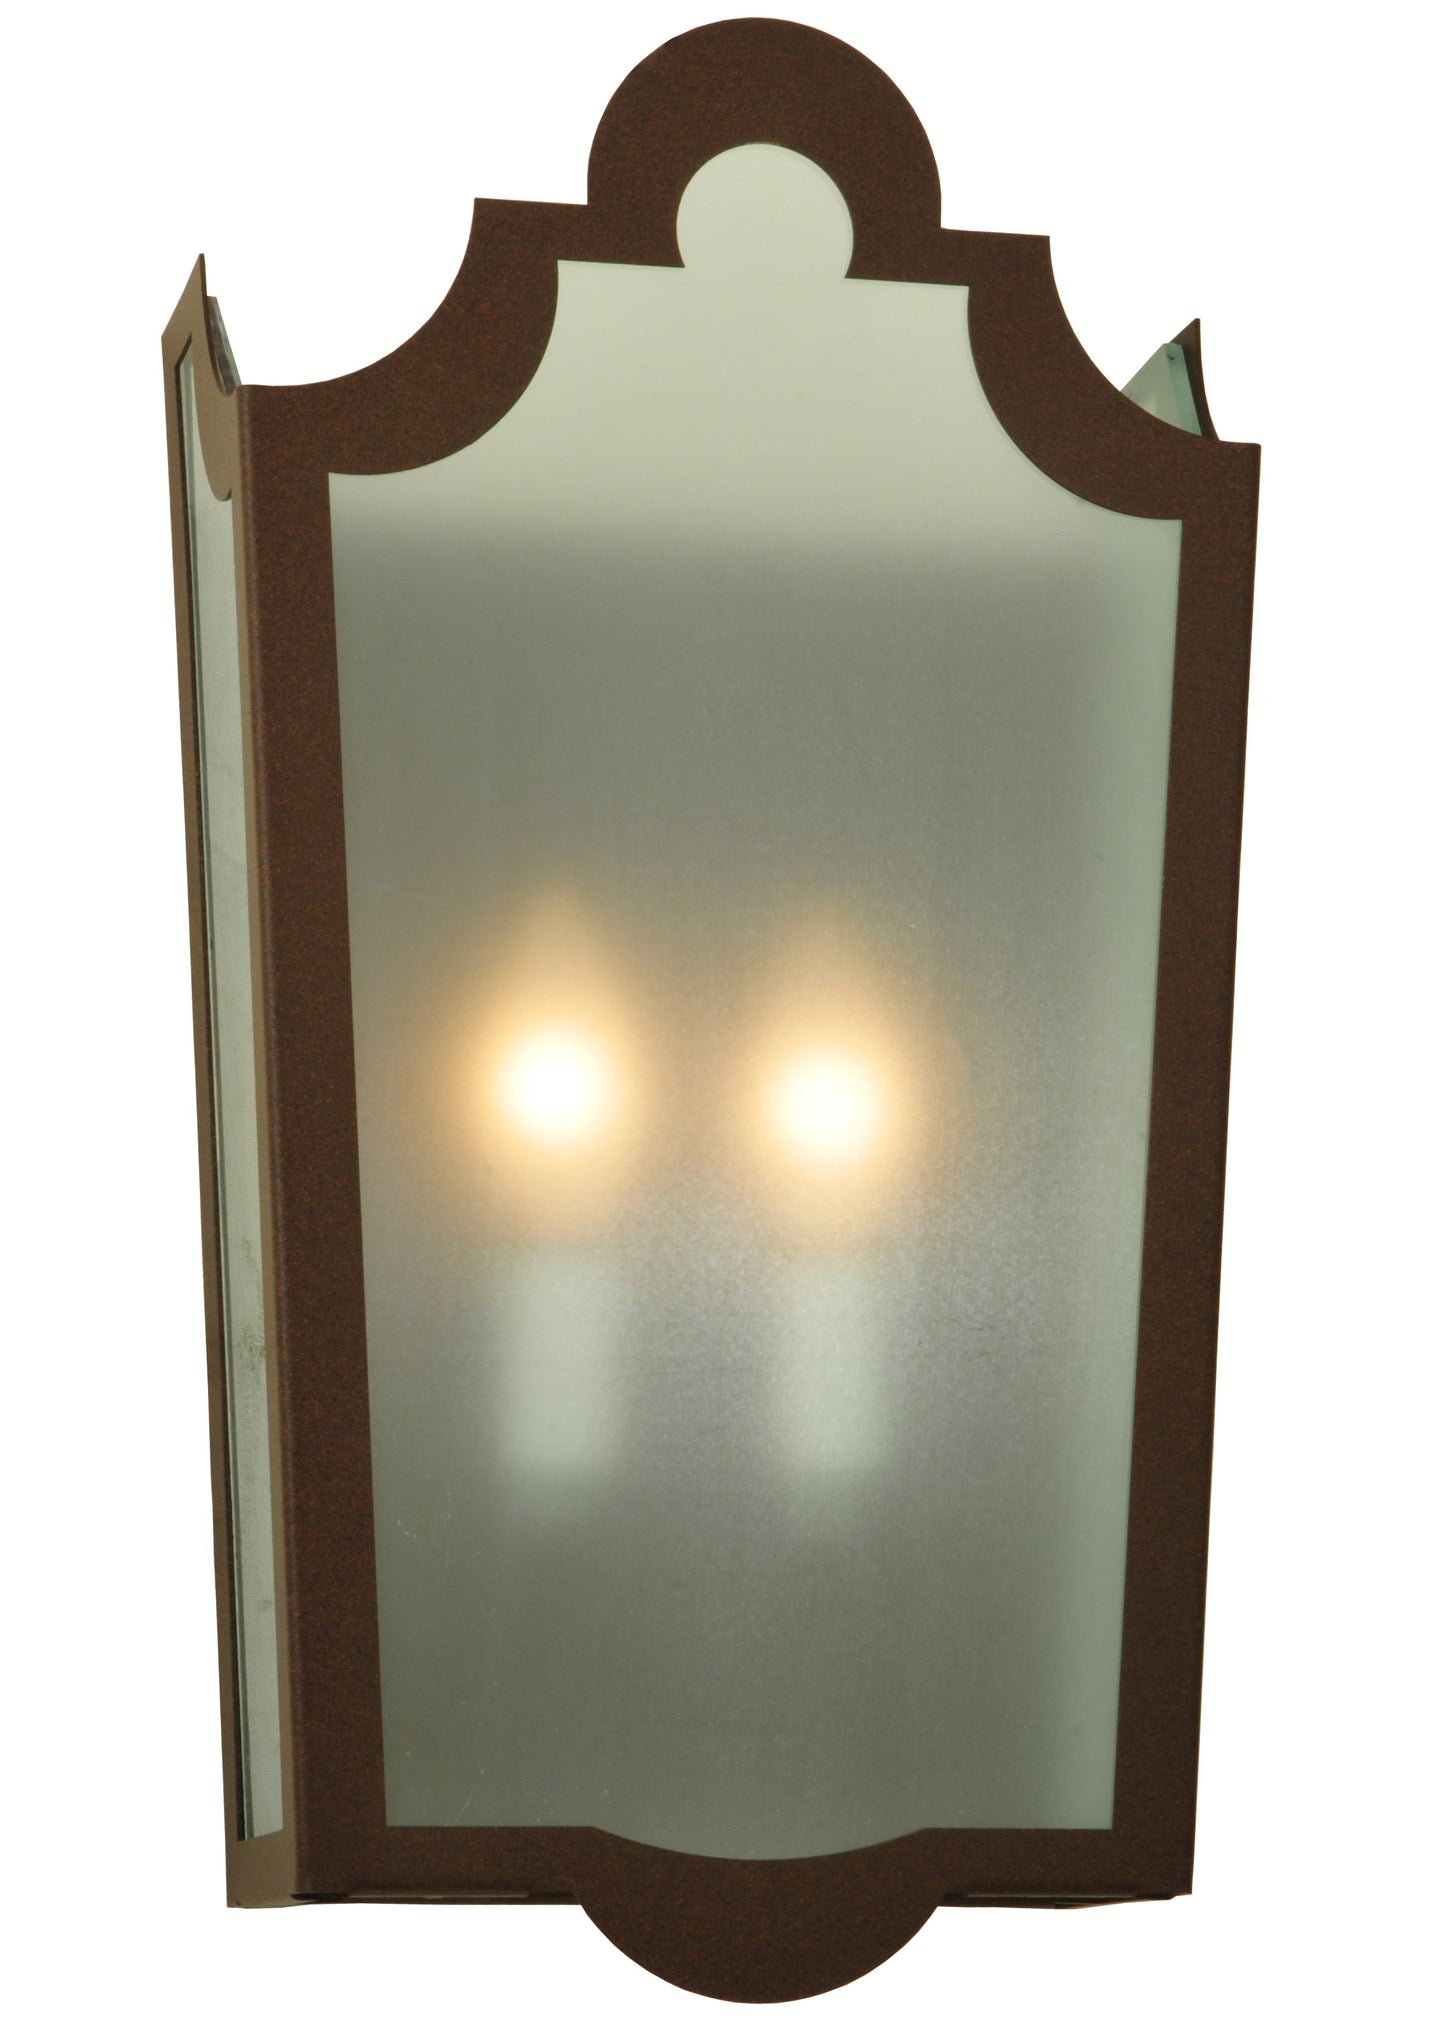 8" French Market Wall Sconce by 2nd Ave Lighting